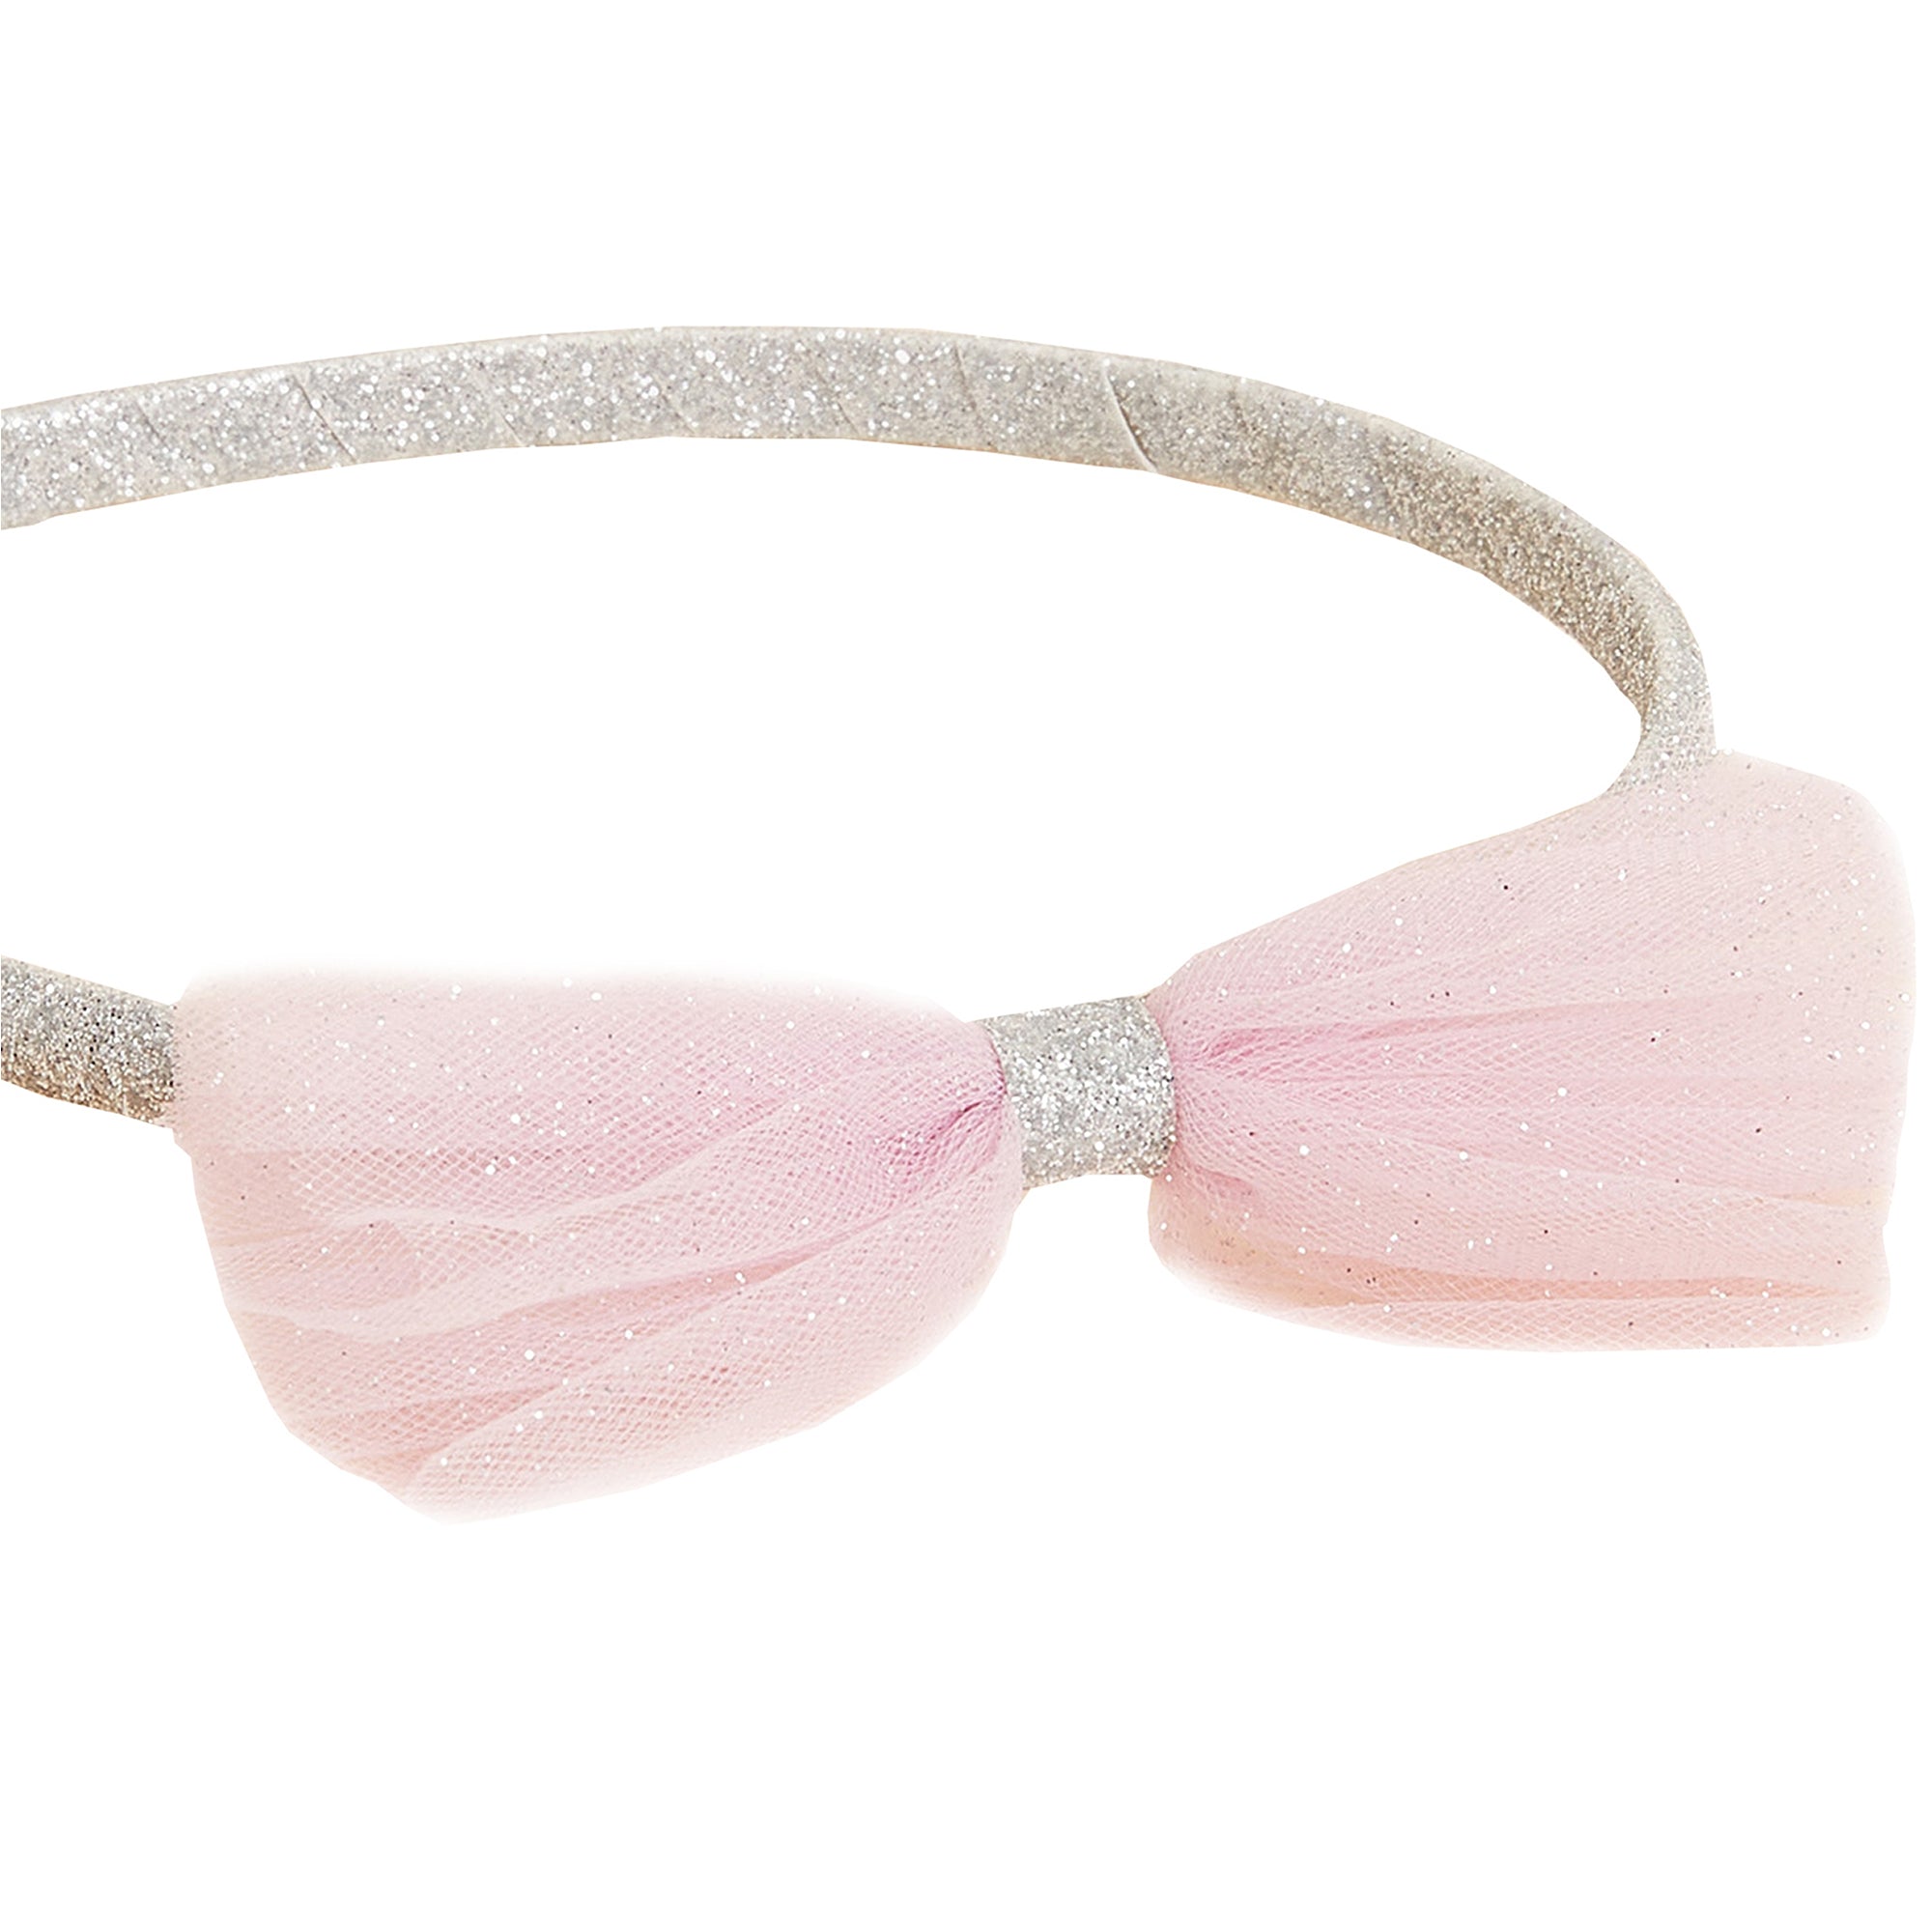 Accessorize London Girl's Party Bow Alice Hair Band